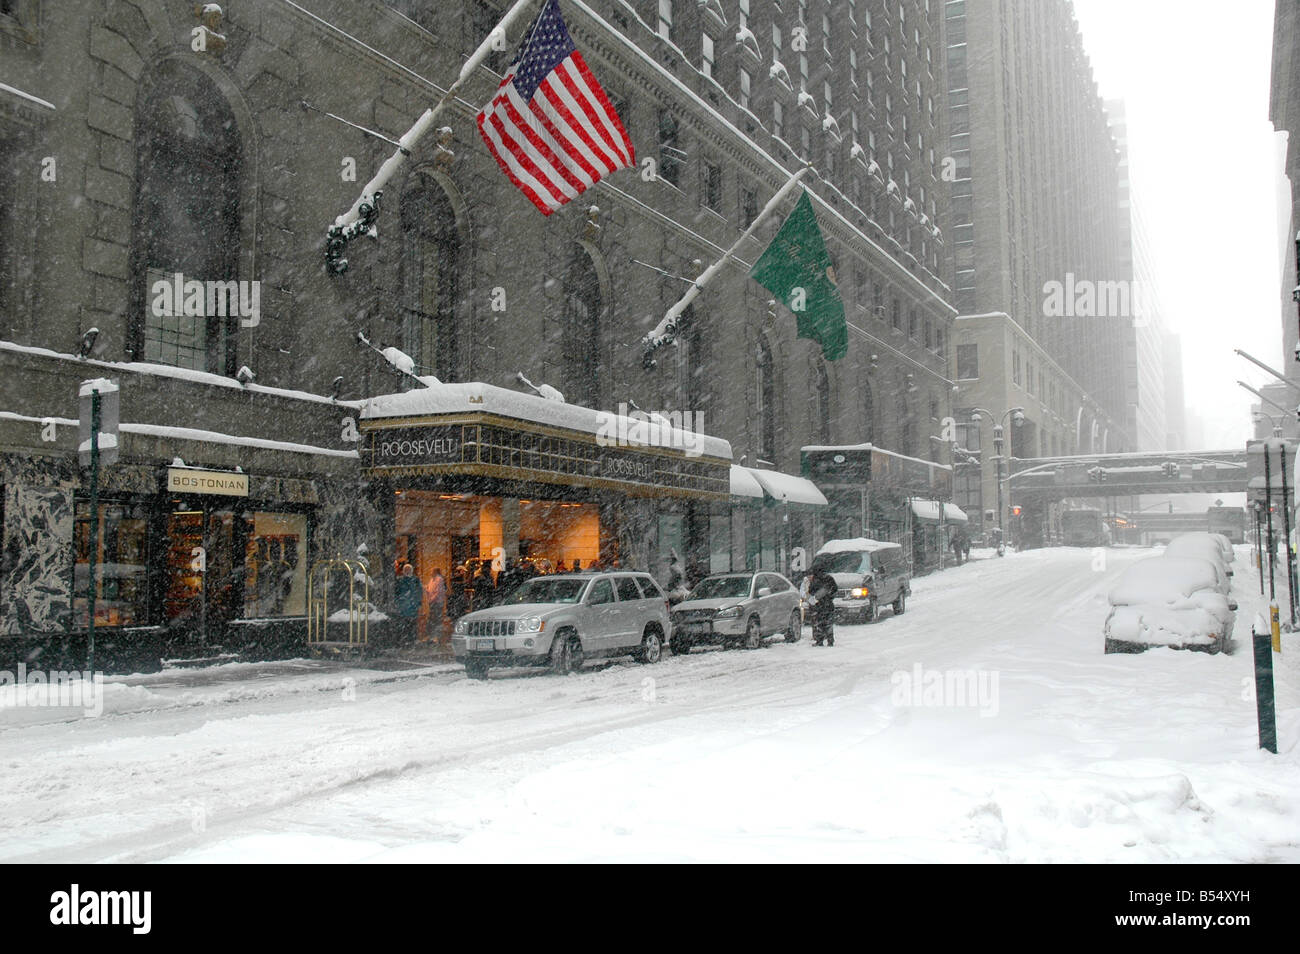 outside the roosevelt hotel during a winter snow storm madison avenue nyc Stock Photo